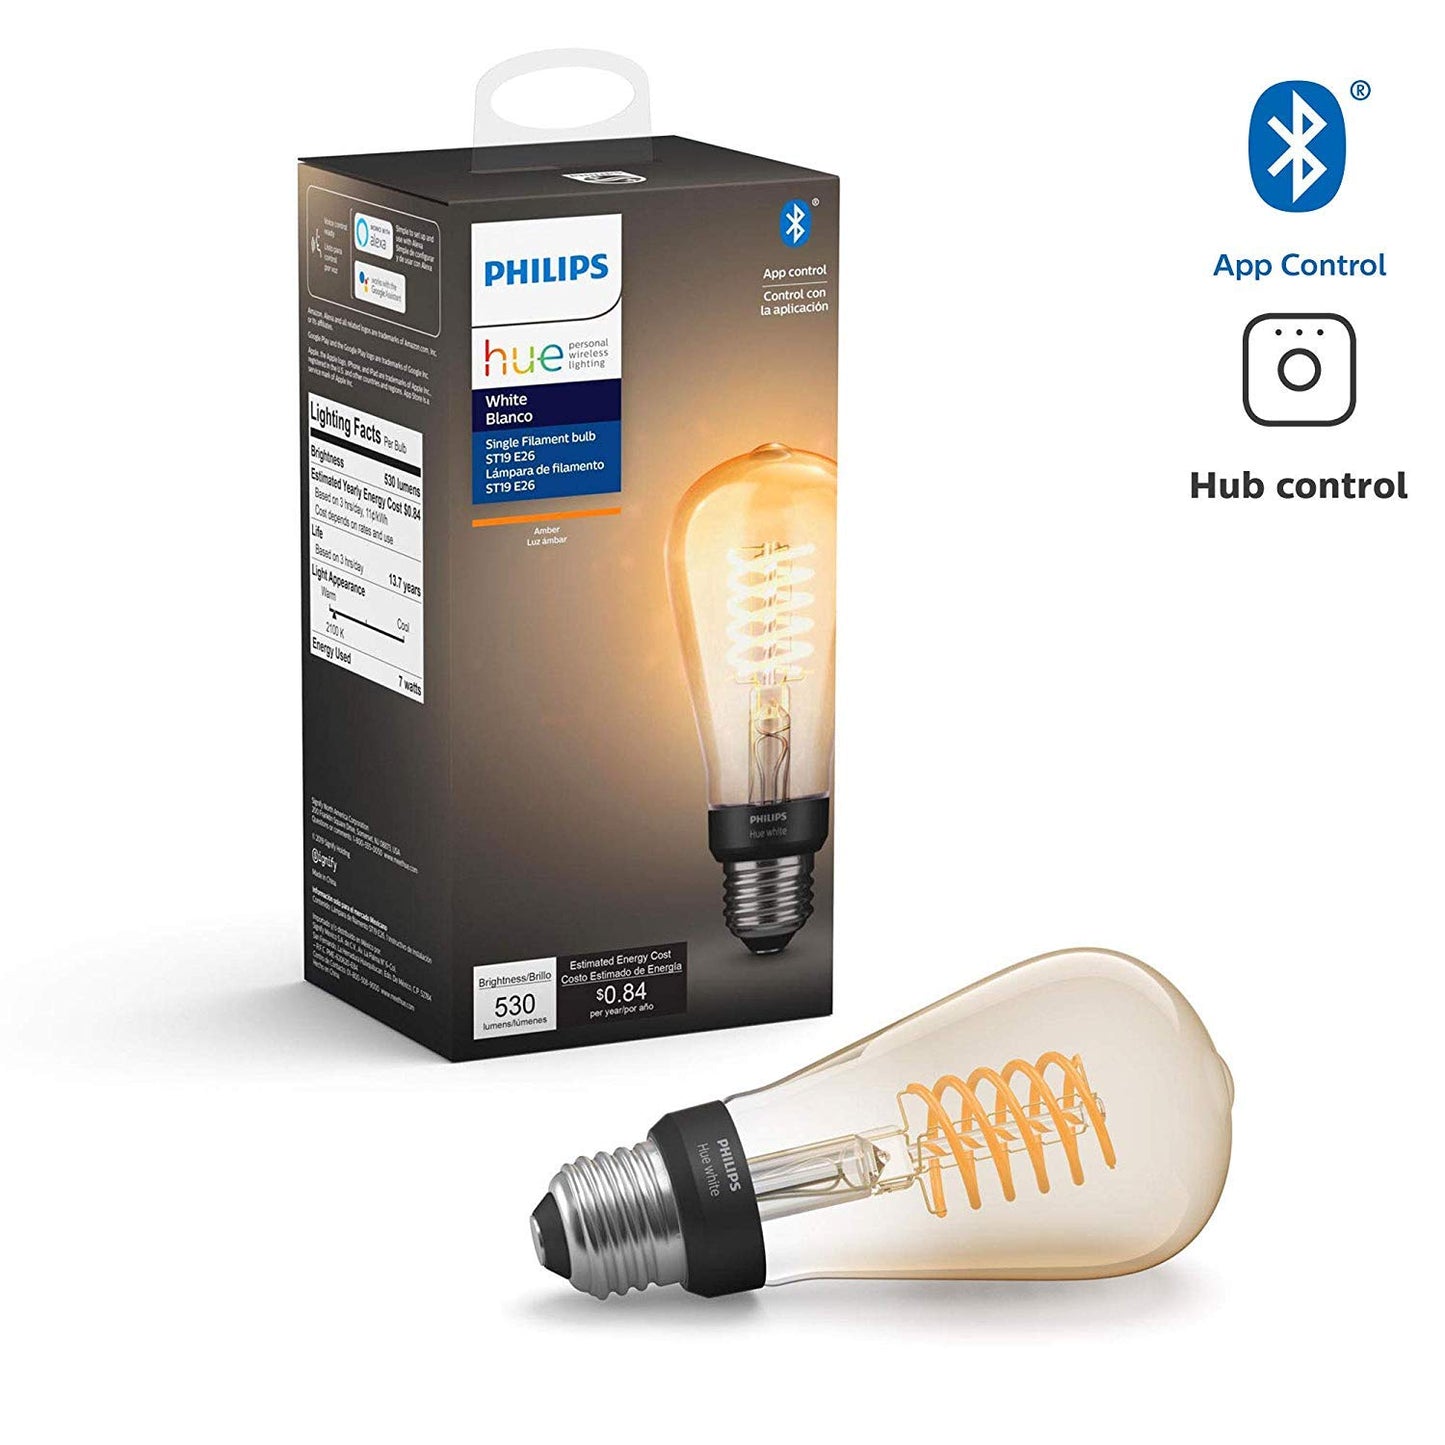 Philips Hue White Ambiance Dimmable Smart Filament G40, Warm-White to Cool-White LED Vintage Edison Globe Bulb, Bluetooth & Hub Compatible (Hue Hub Optional), Voice Activated with Alexa, 4-Pack